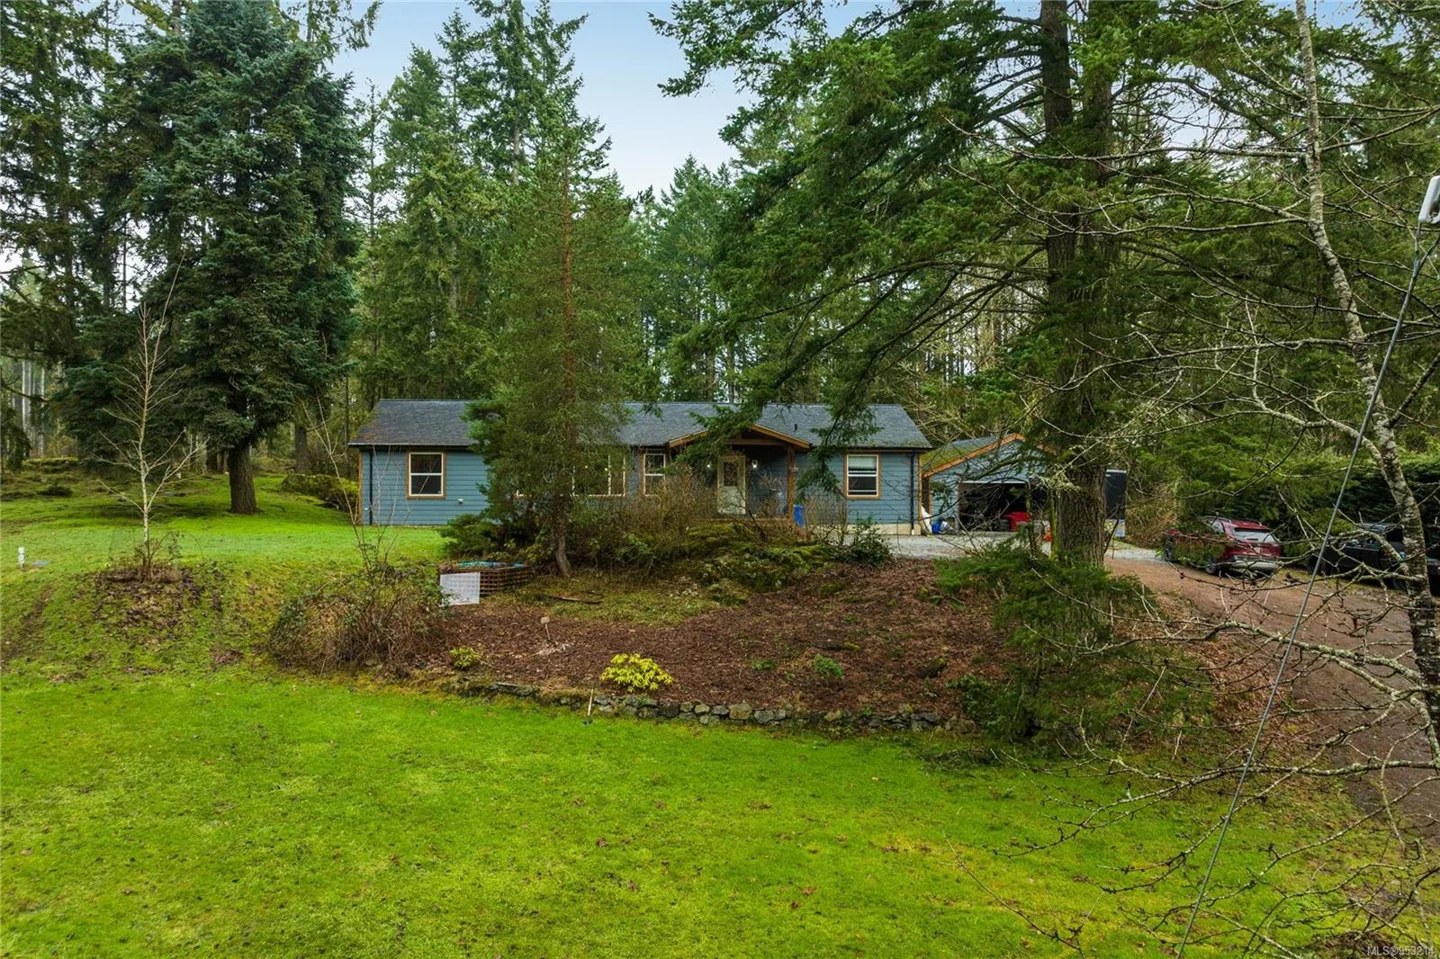 One Acre Lot Just Minutes Away From Shawnigan Lake